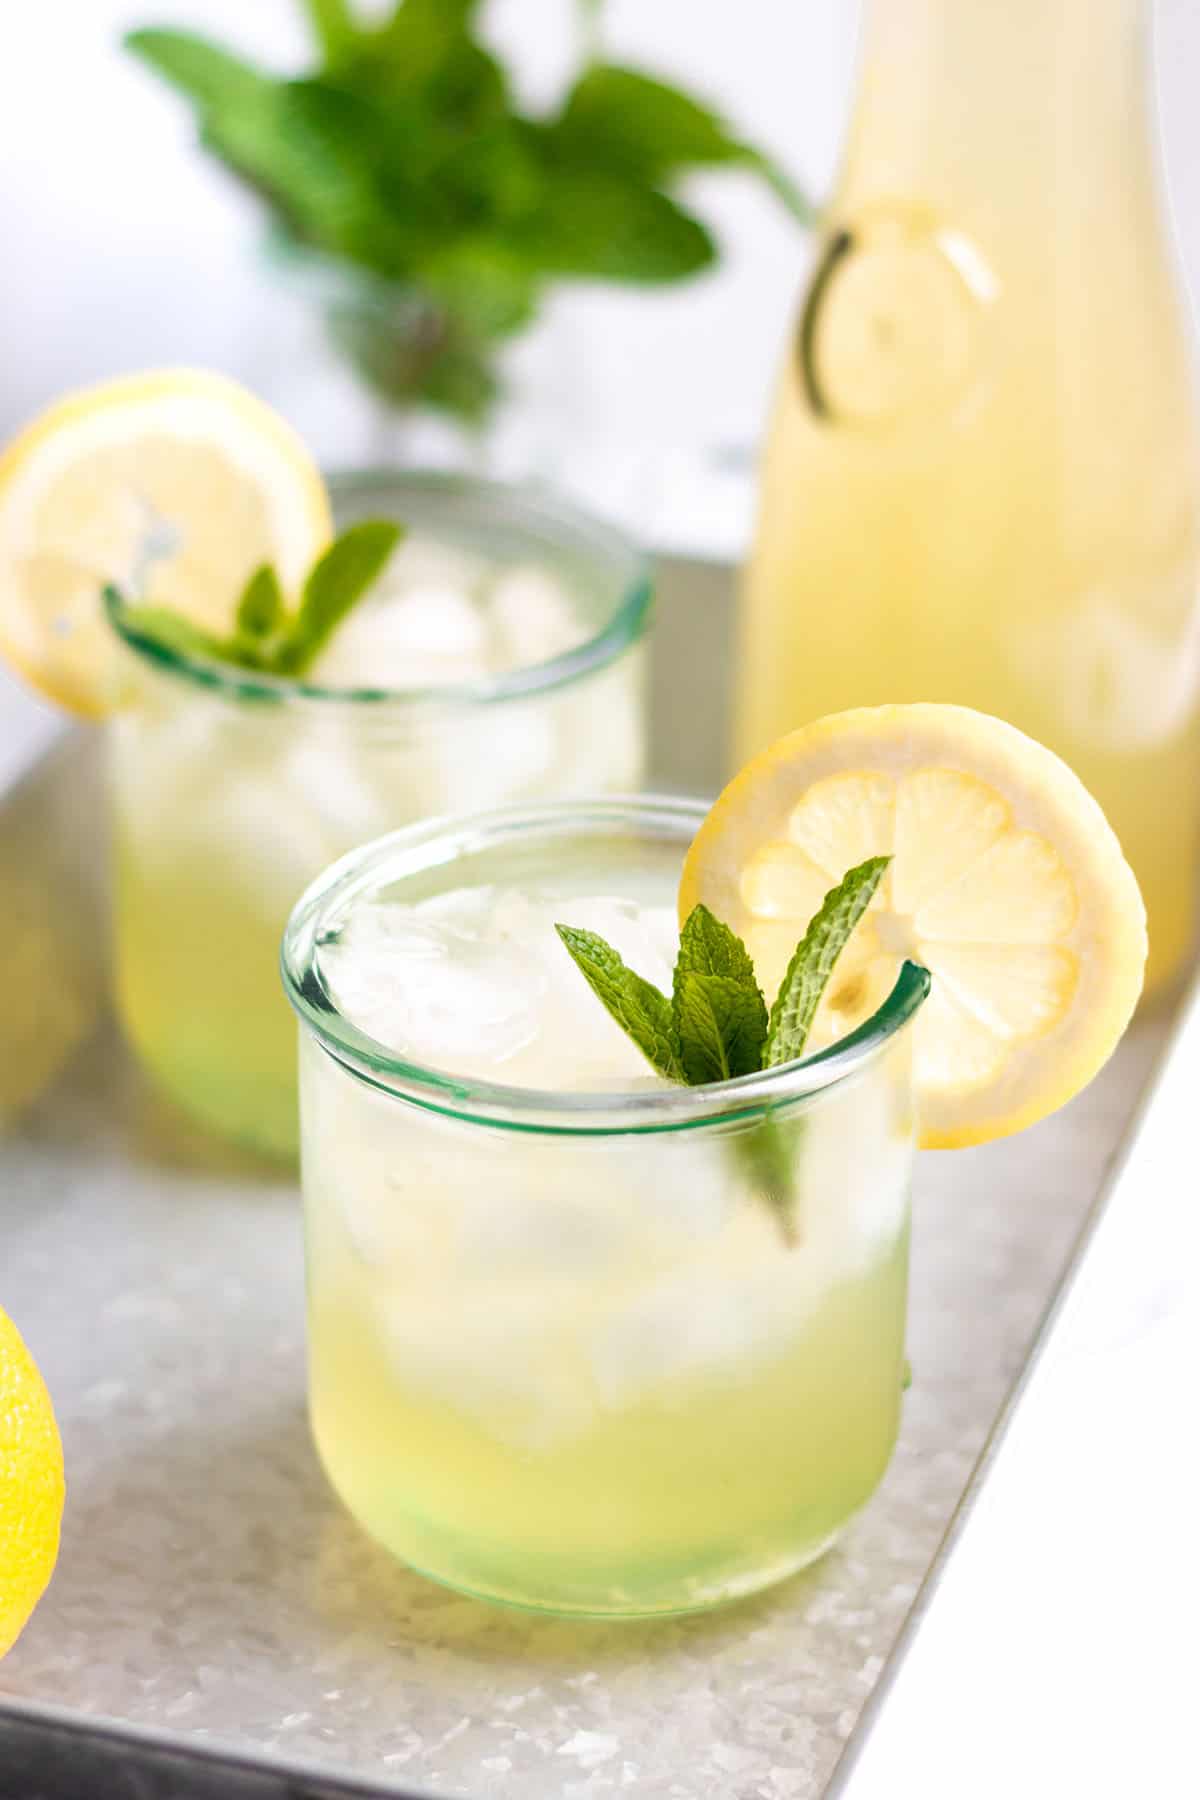 Two glasses with ice and lemonade with fresh mint and lemon slices.